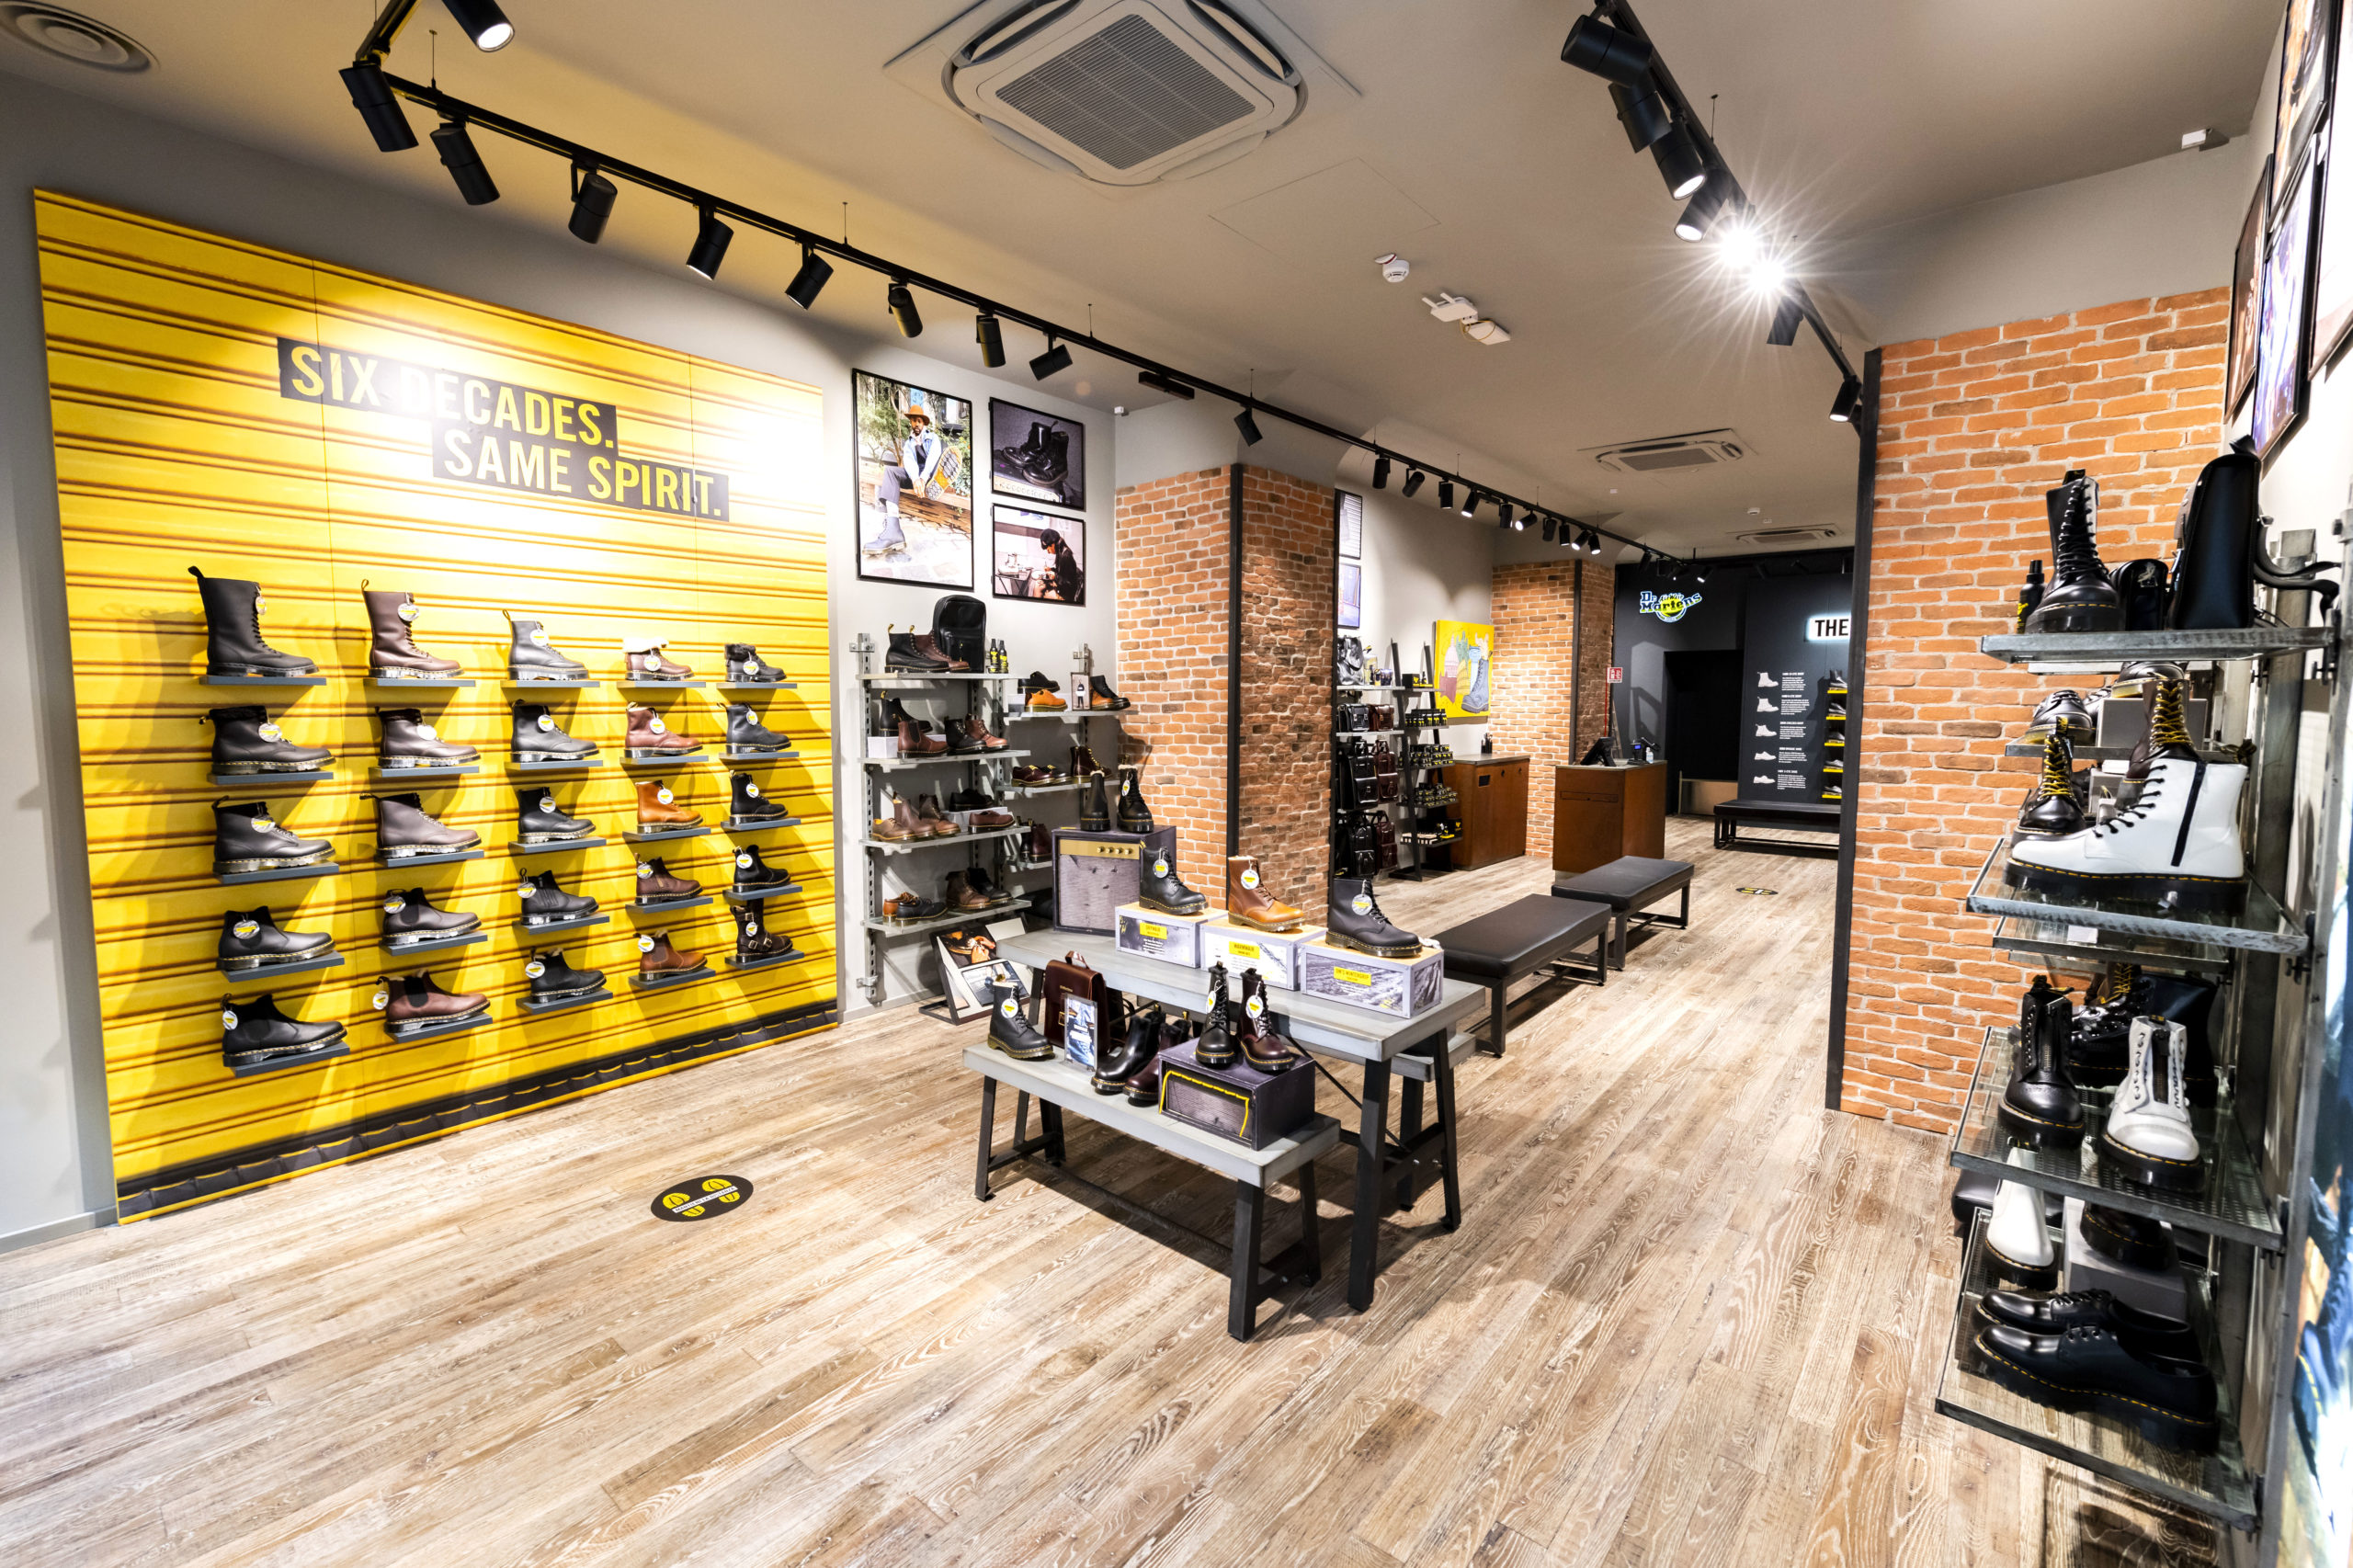 Dr. Martens store, displaying a full range of products